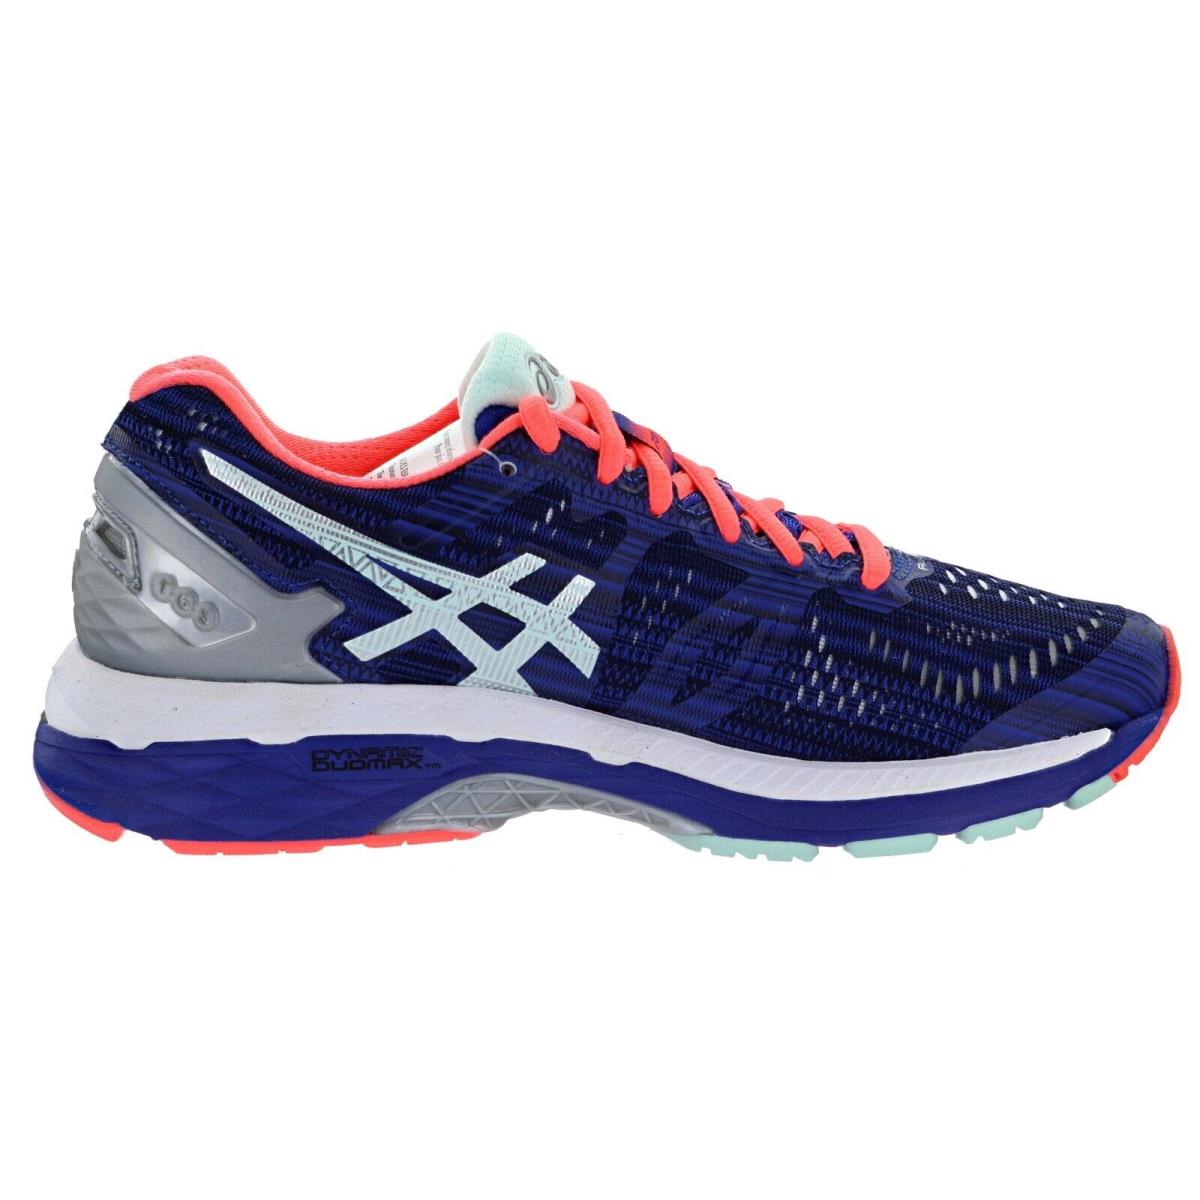 ASICS shoes  - Asics Blue, Silver, Flash Coral 1